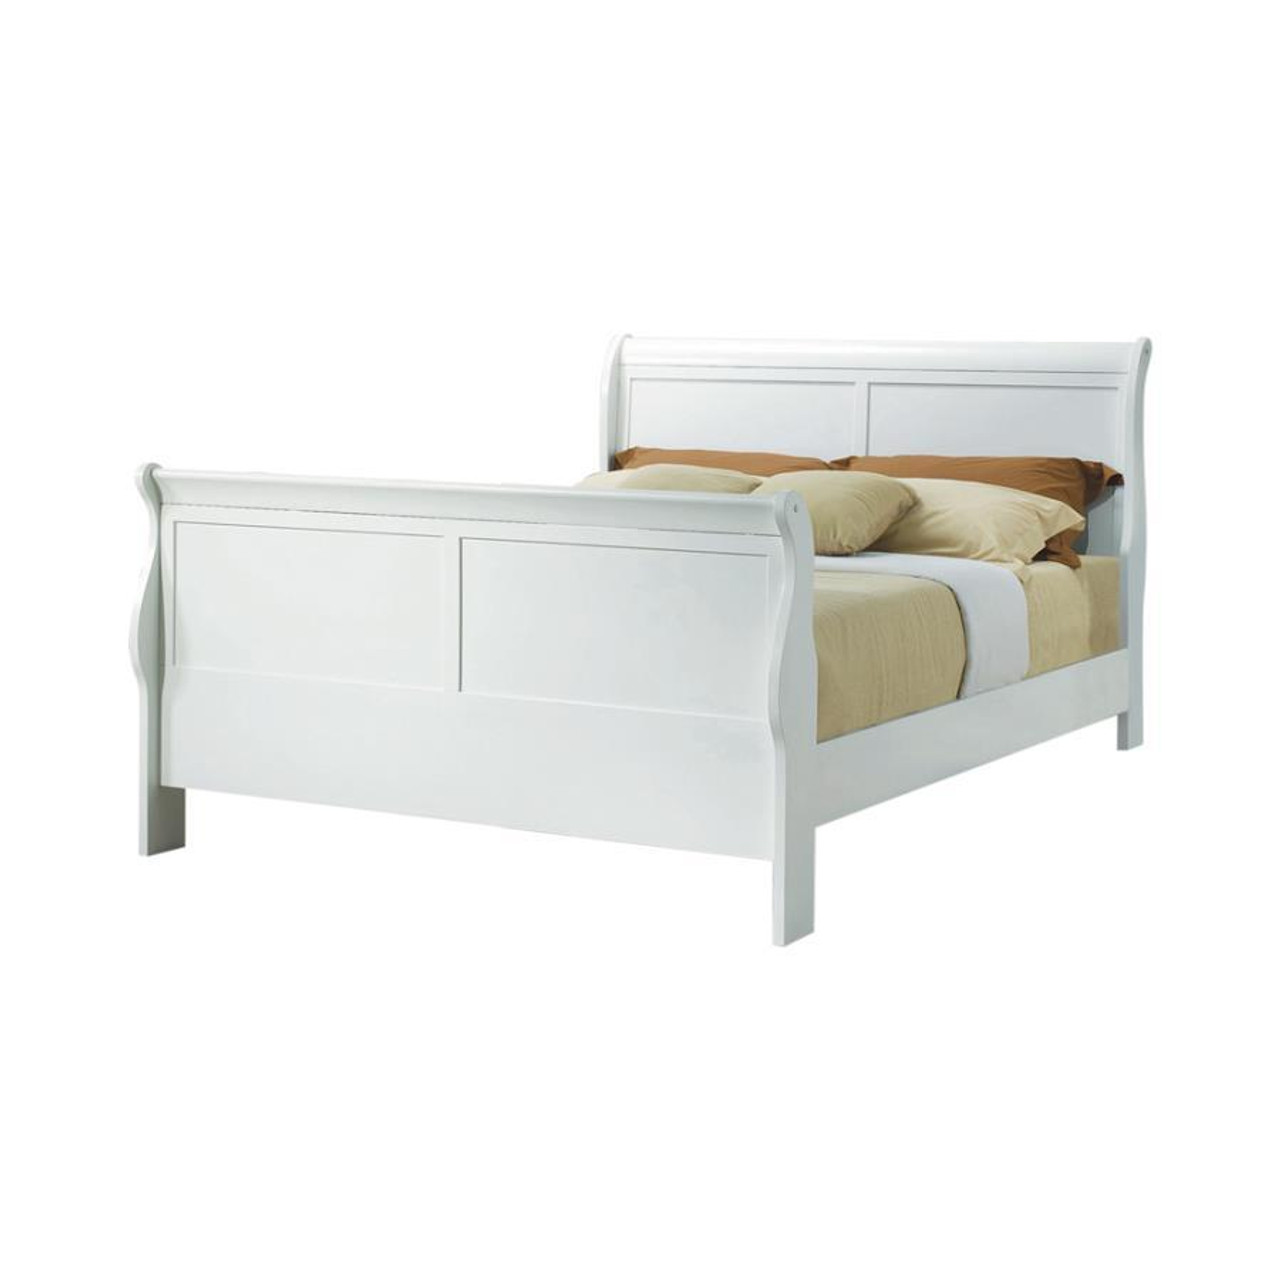 The Louis Philippe Queen Bed White sold at Hilton Furniture serving  Houston, TX and surrounding areas.